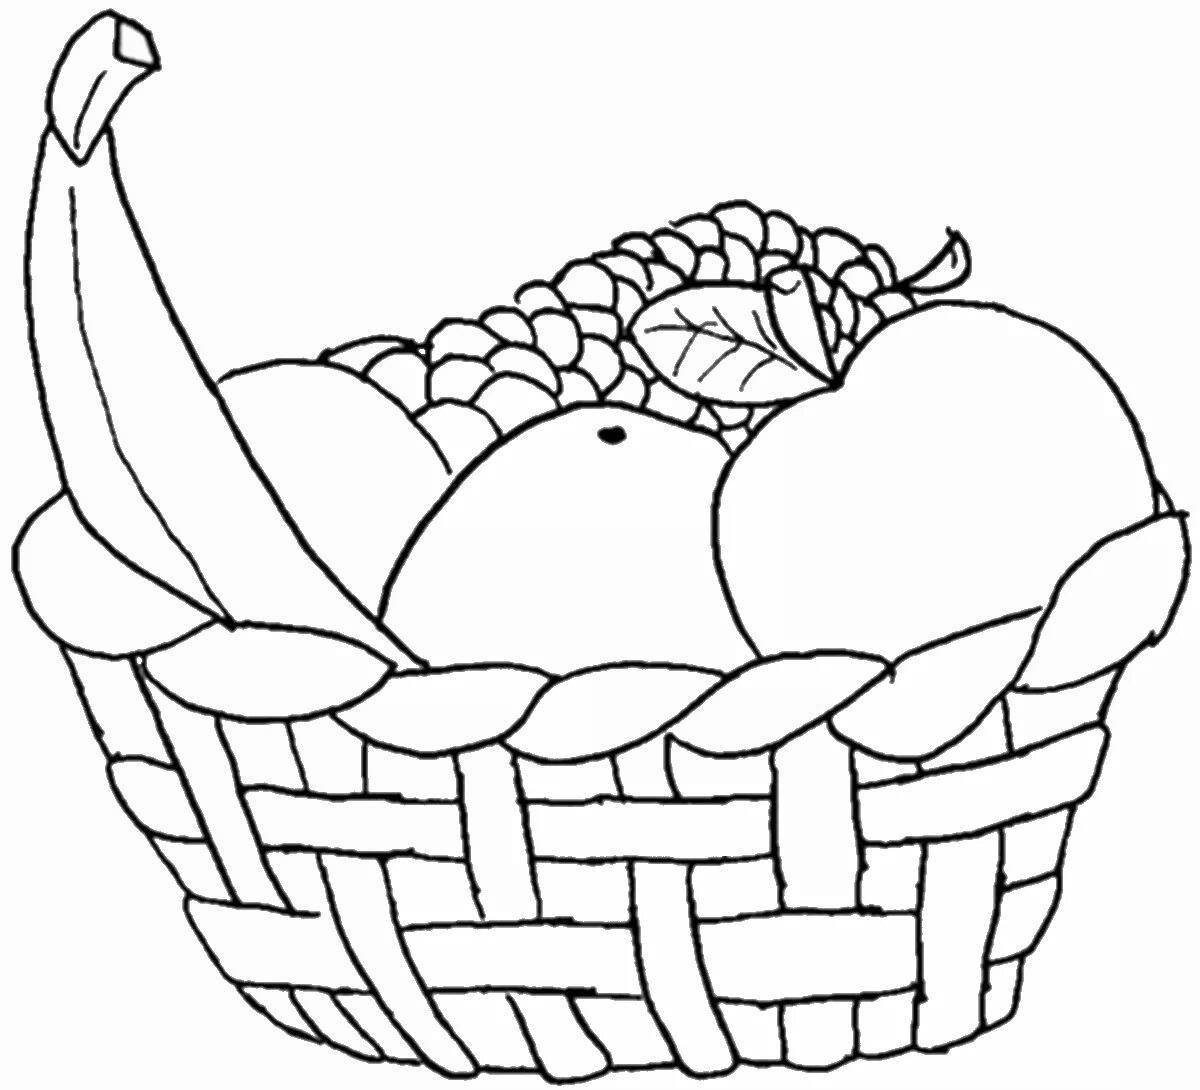 Sweet harvest of fruits and vegetables in a basket